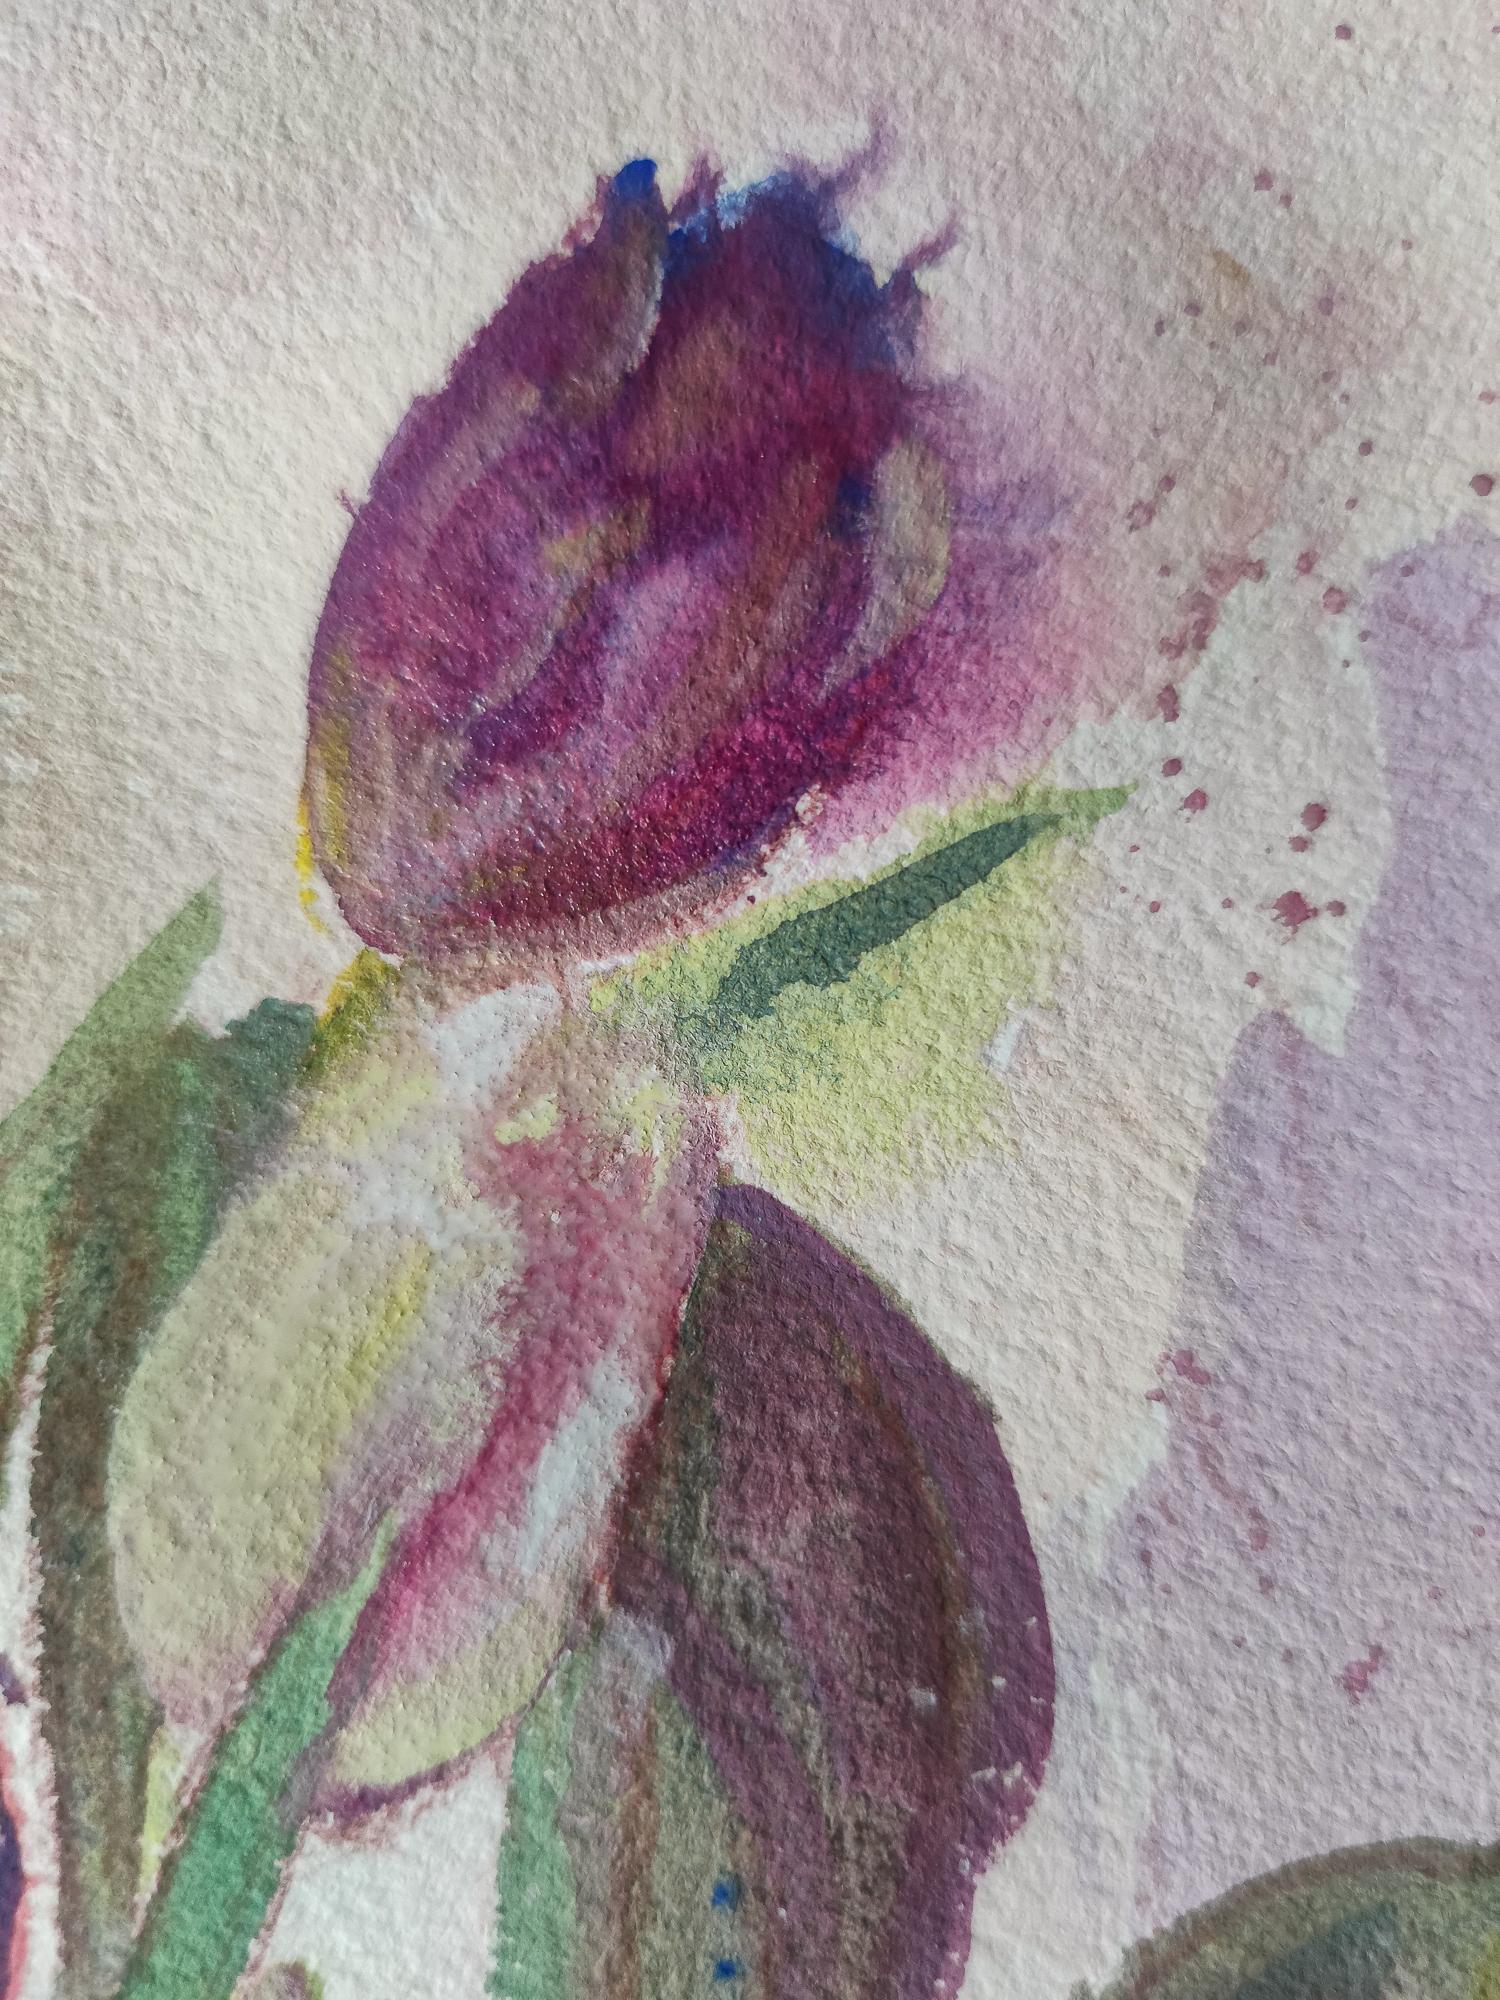 In this enchanting artwork, Linda Clerget captures the very essence of blossoming nature through a majestic bouquet of tulips. Delicate petals unfurl in a burst of vibrant colors, ranging from soft hues to bold bursts. Each tulip, like a harmonious